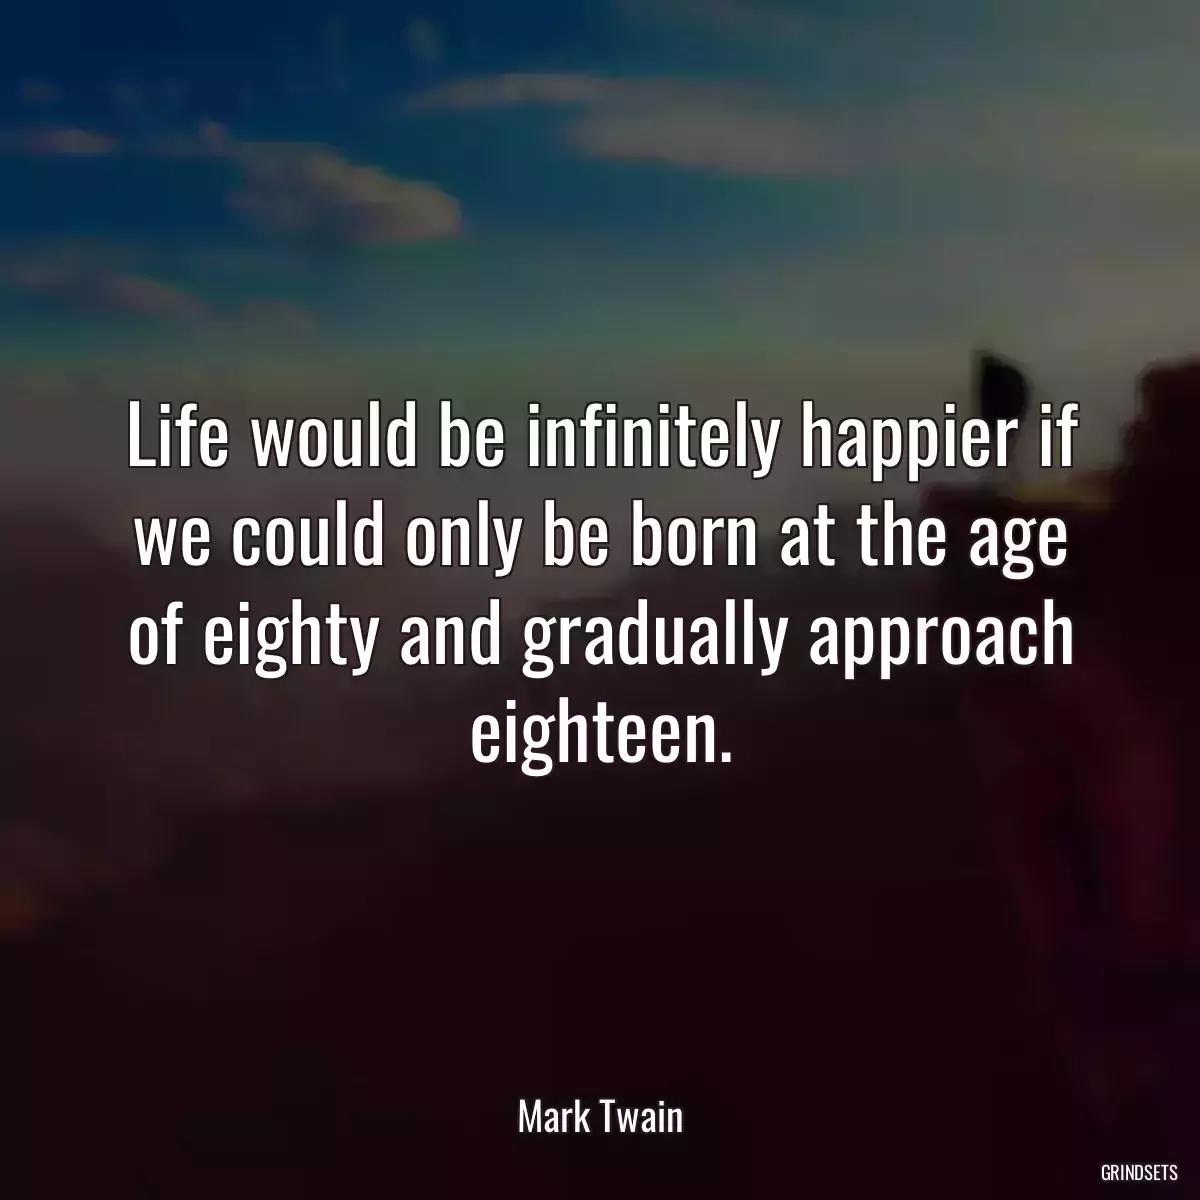 Life would be infinitely happier if we could only be born at the age of eighty and gradually approach eighteen.